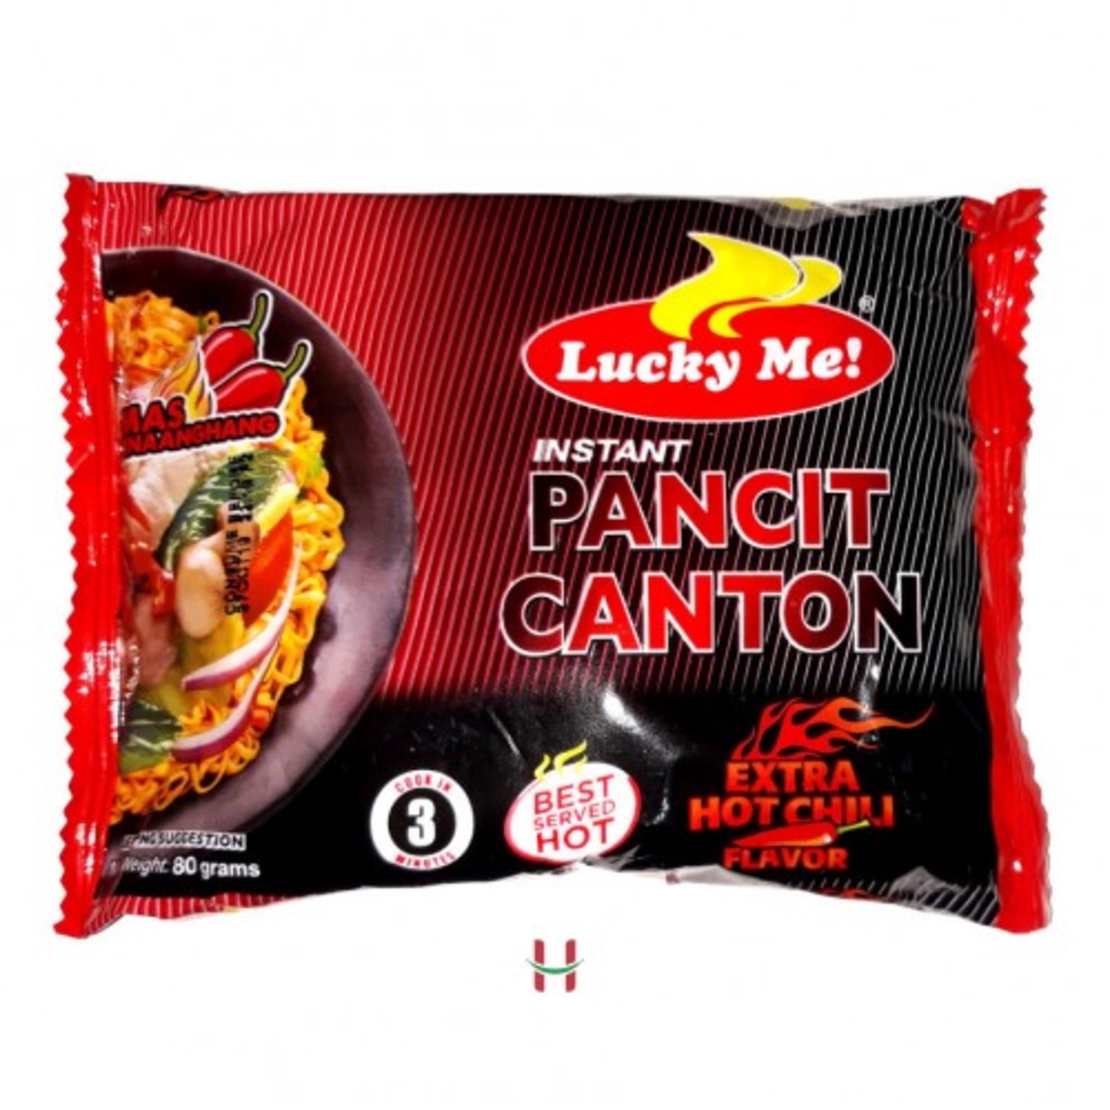 BIG Lucky me - instant Pancit Canton - extra Hot Chili